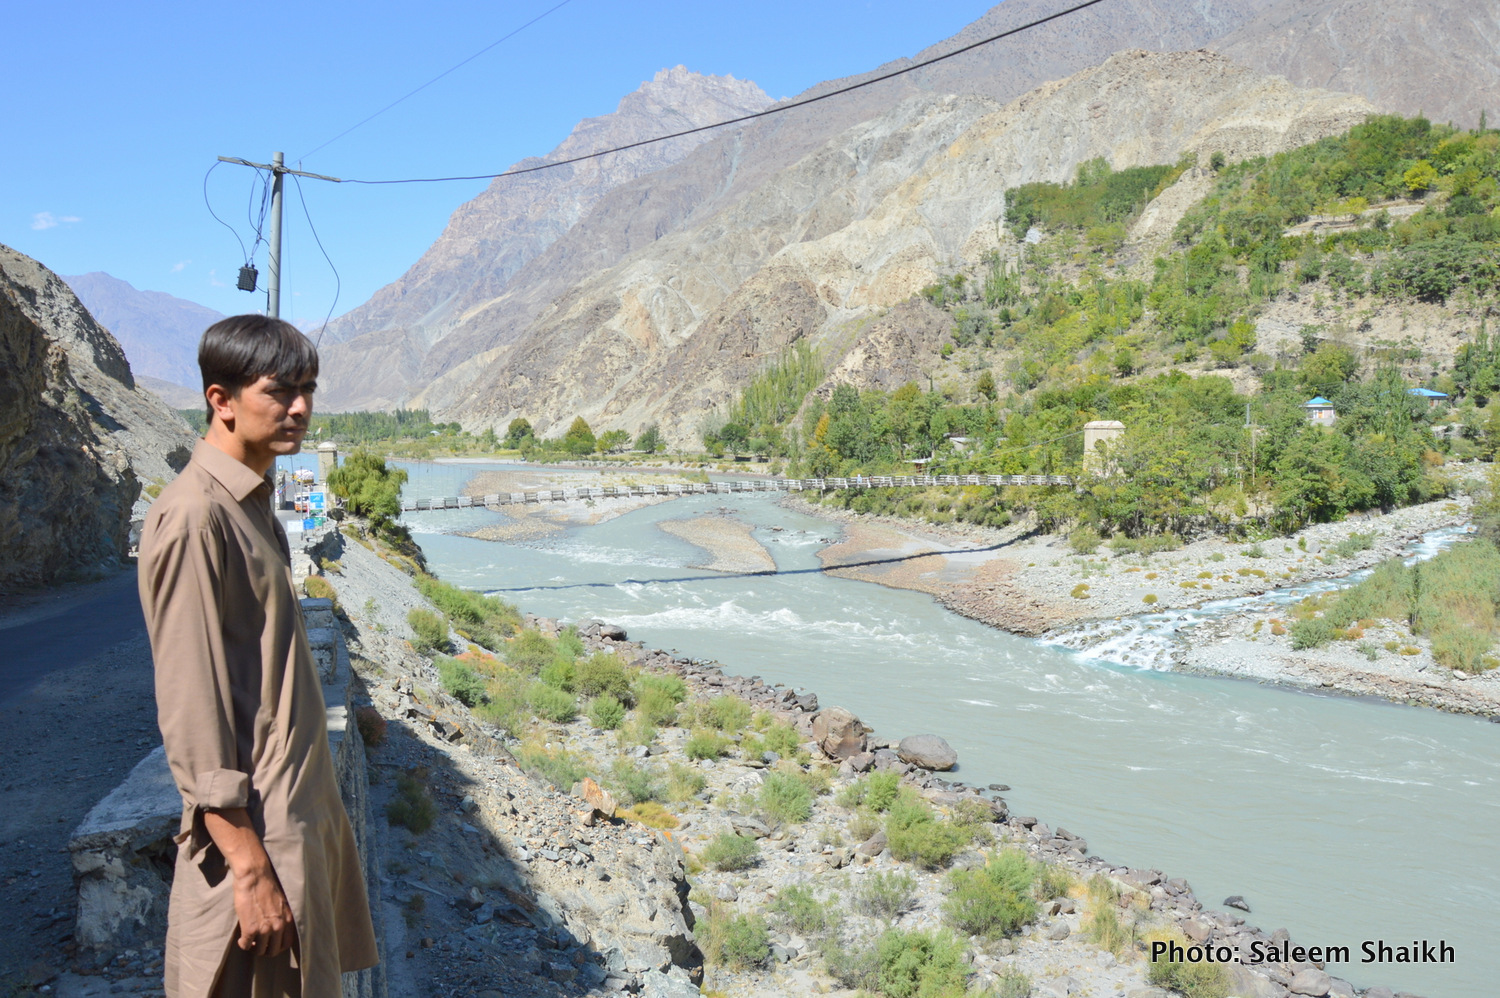 A boy looks at Gizer river, main tributary of the Indus river in picturesque valley of Gizer district, Pakistan’s north. The locals say the river often gets swollen and pose serious risk to different mountain communities on its either side as local temperature continue to rise, causing paced-up glacial melt which generates flash floods. Photo credit: Saleem Shaikh